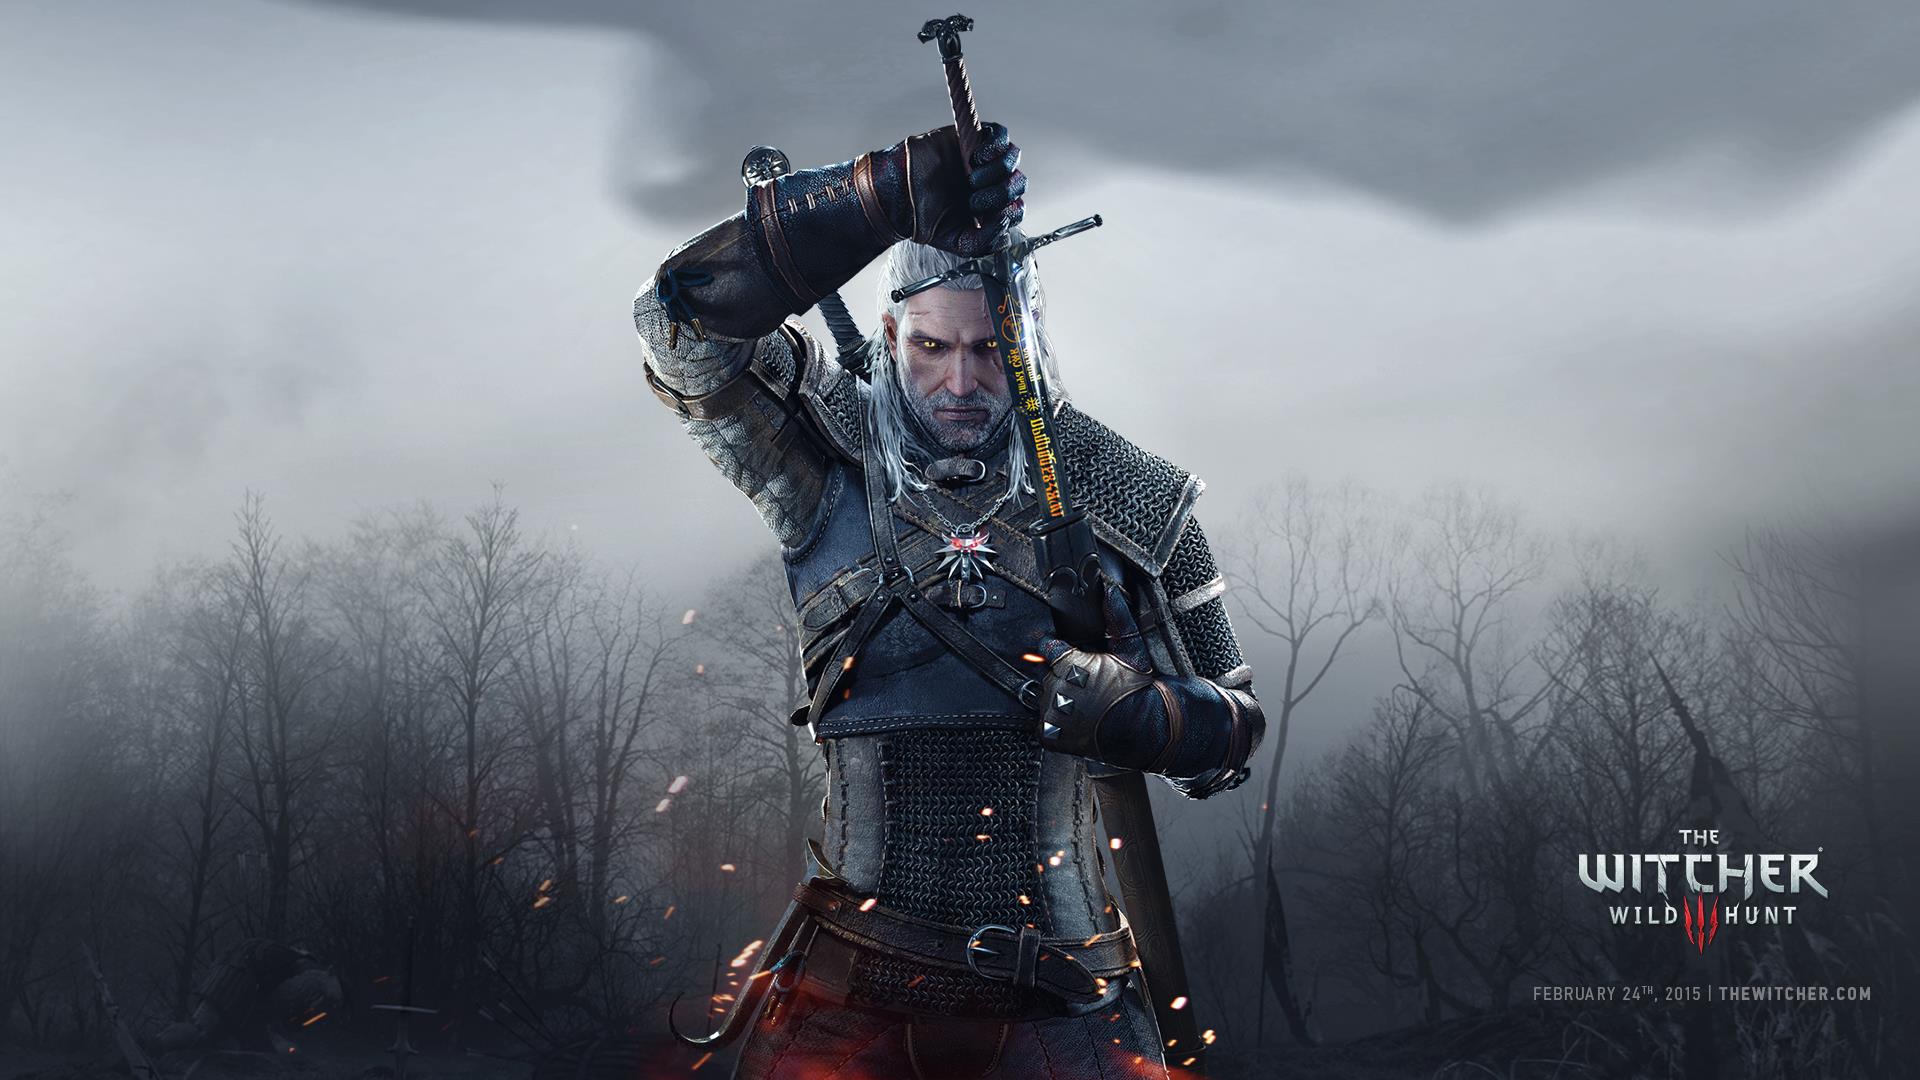 The Witcher 3 Ending